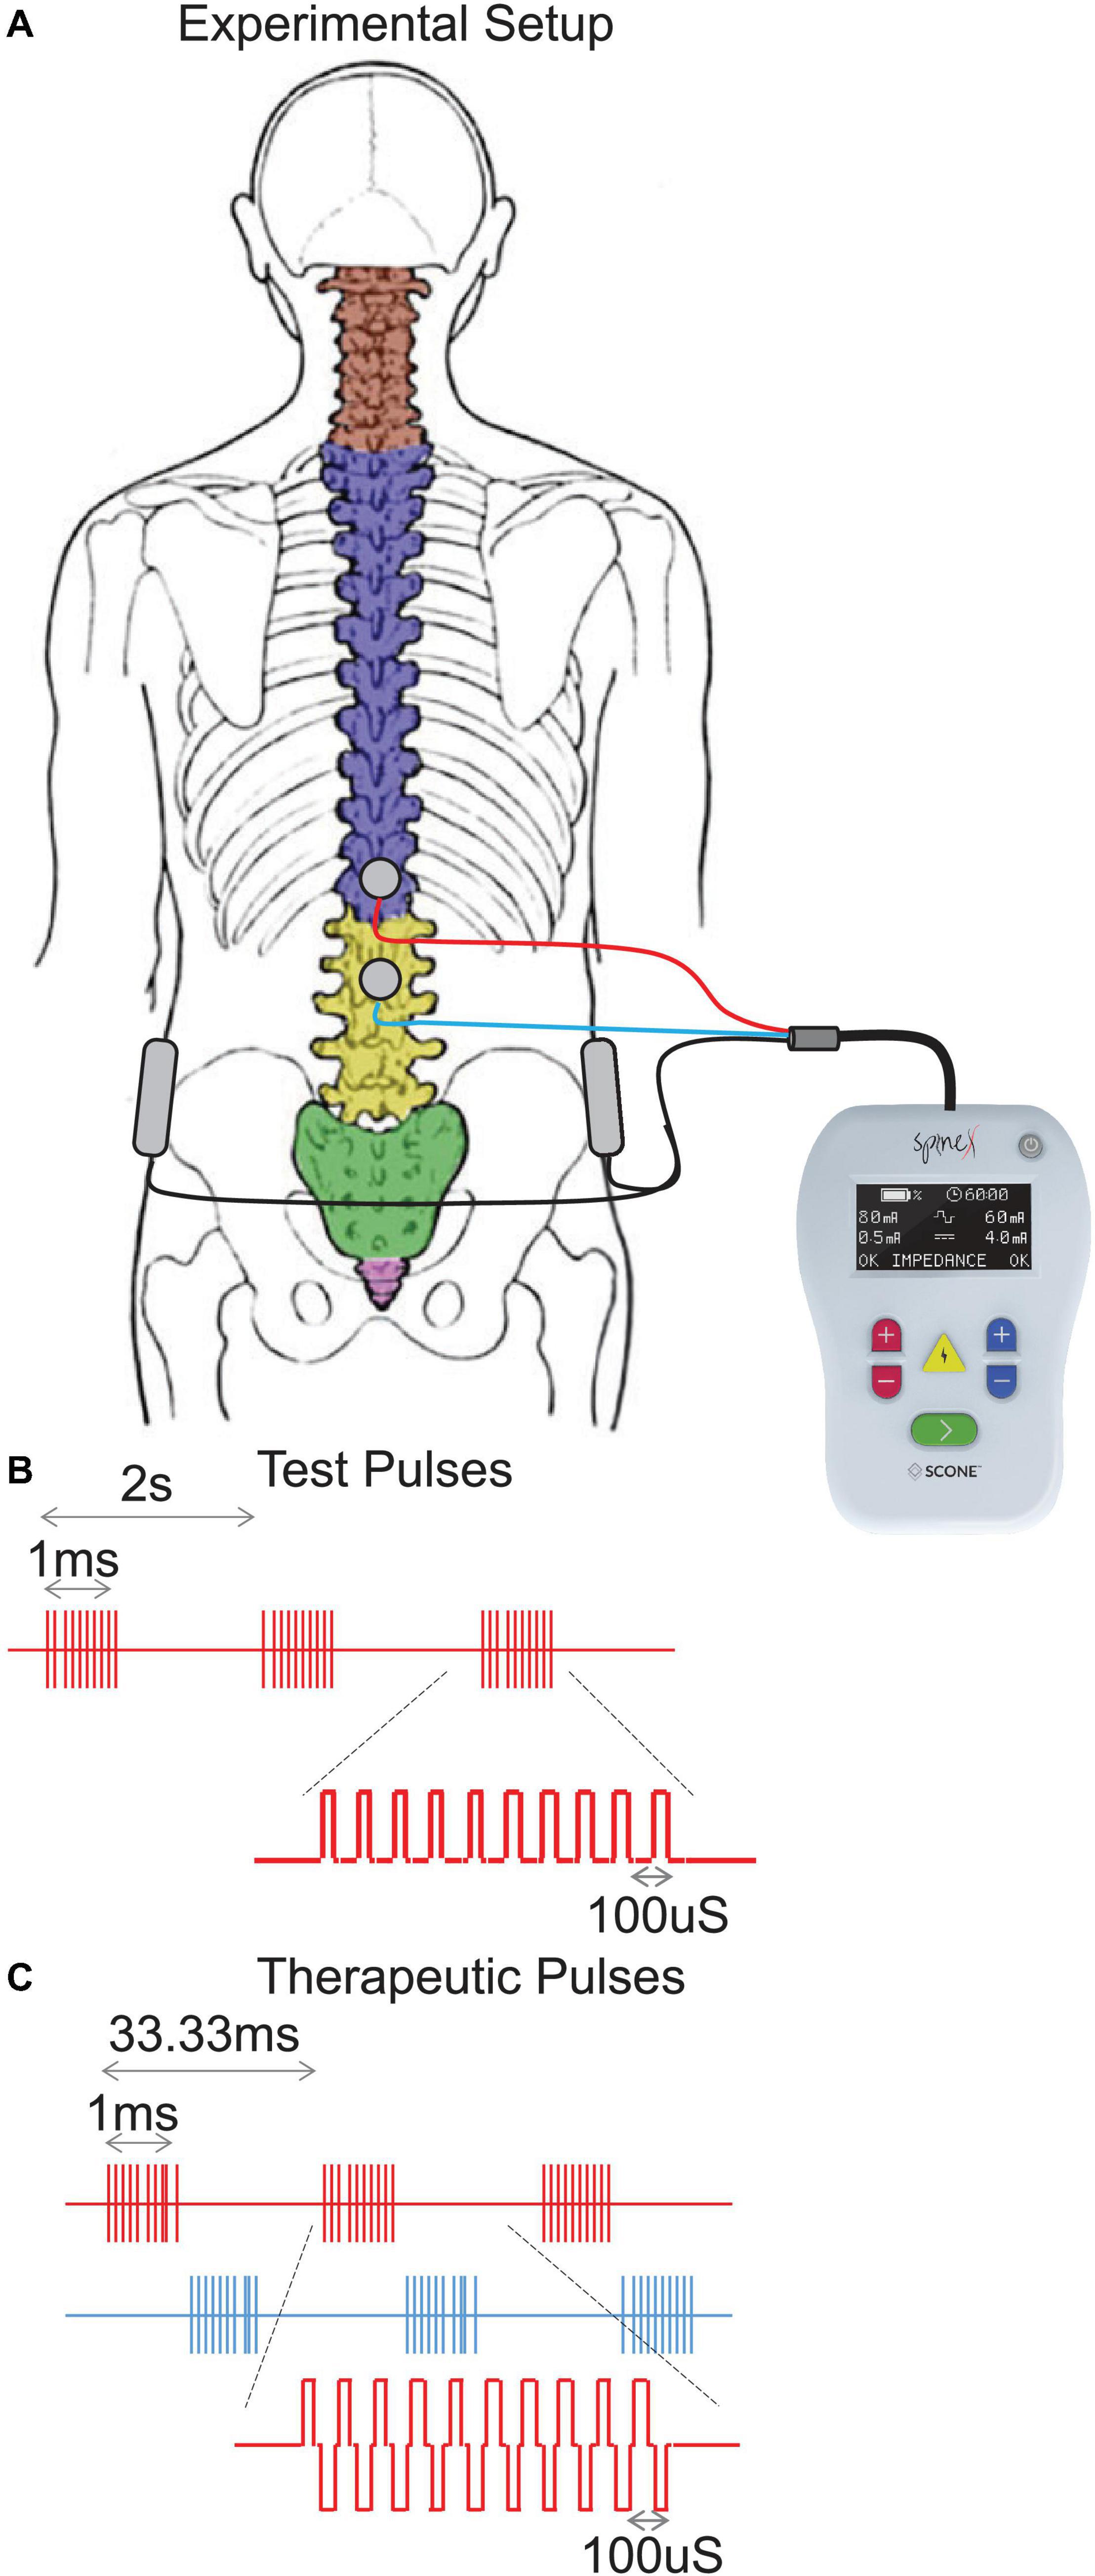 What Conditions Can a Spinal Cord Stimulator Treat?